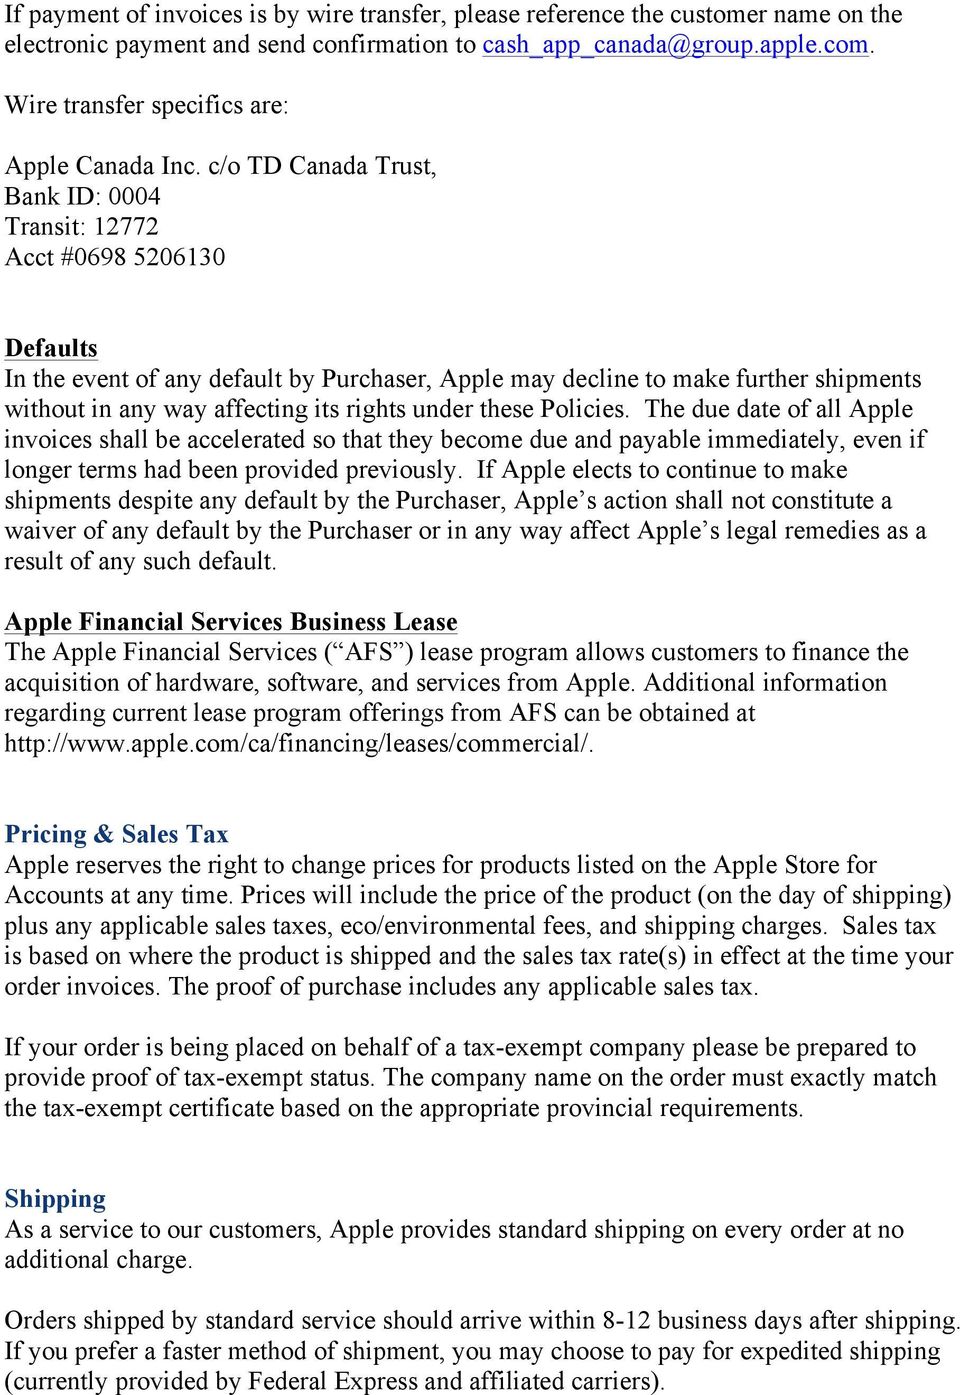 c/o TD Canada Trust, Bank ID: 0004 Transit: 12772 Acct #0698 5206130 Defaults In the event of any default by Purchaser, Apple may decline to make further shipments without in any way affecting its